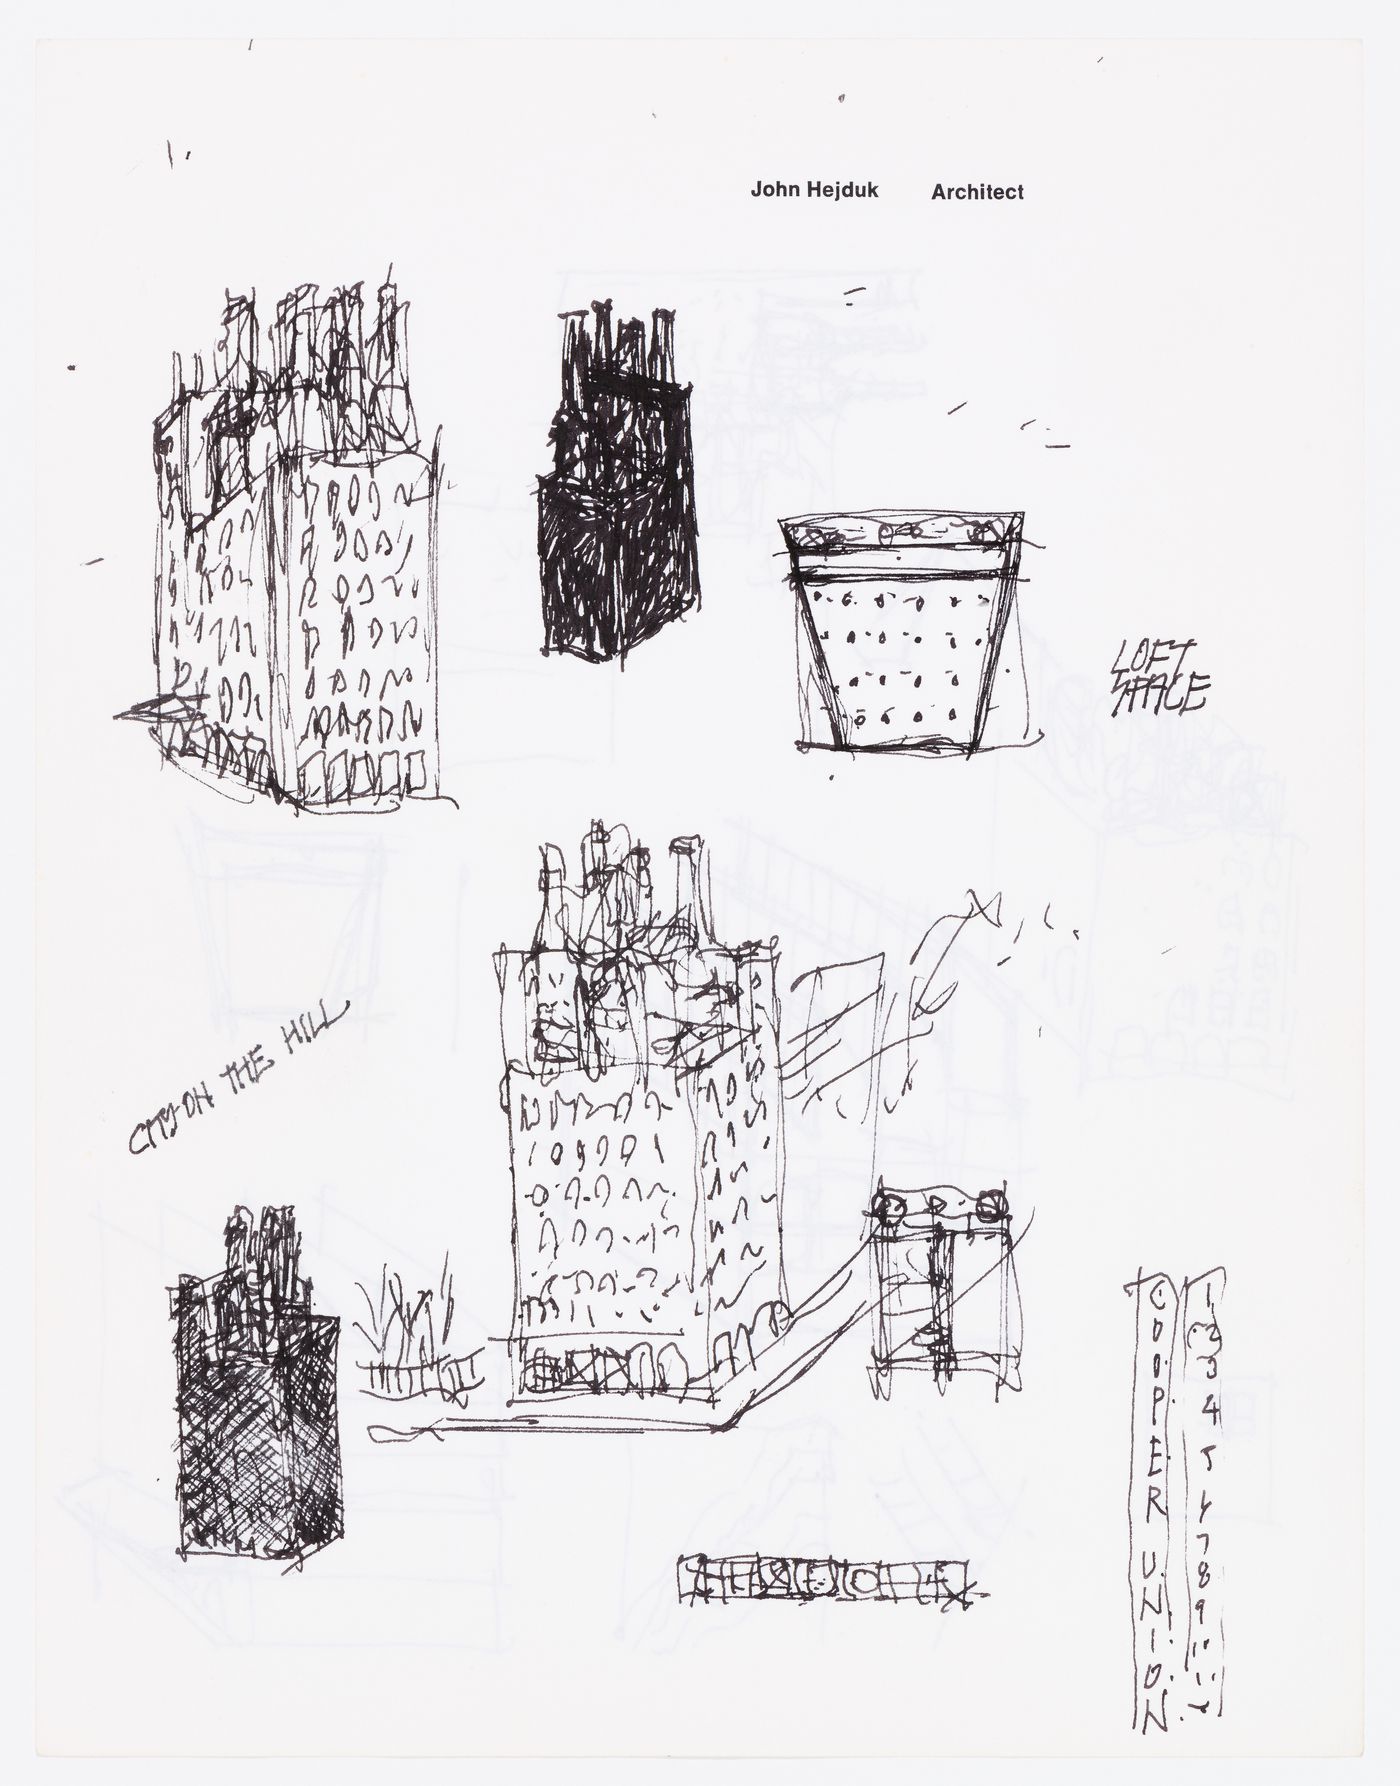 Cooper Union Foundation Building Renovation, New York, N.Y.: sketches